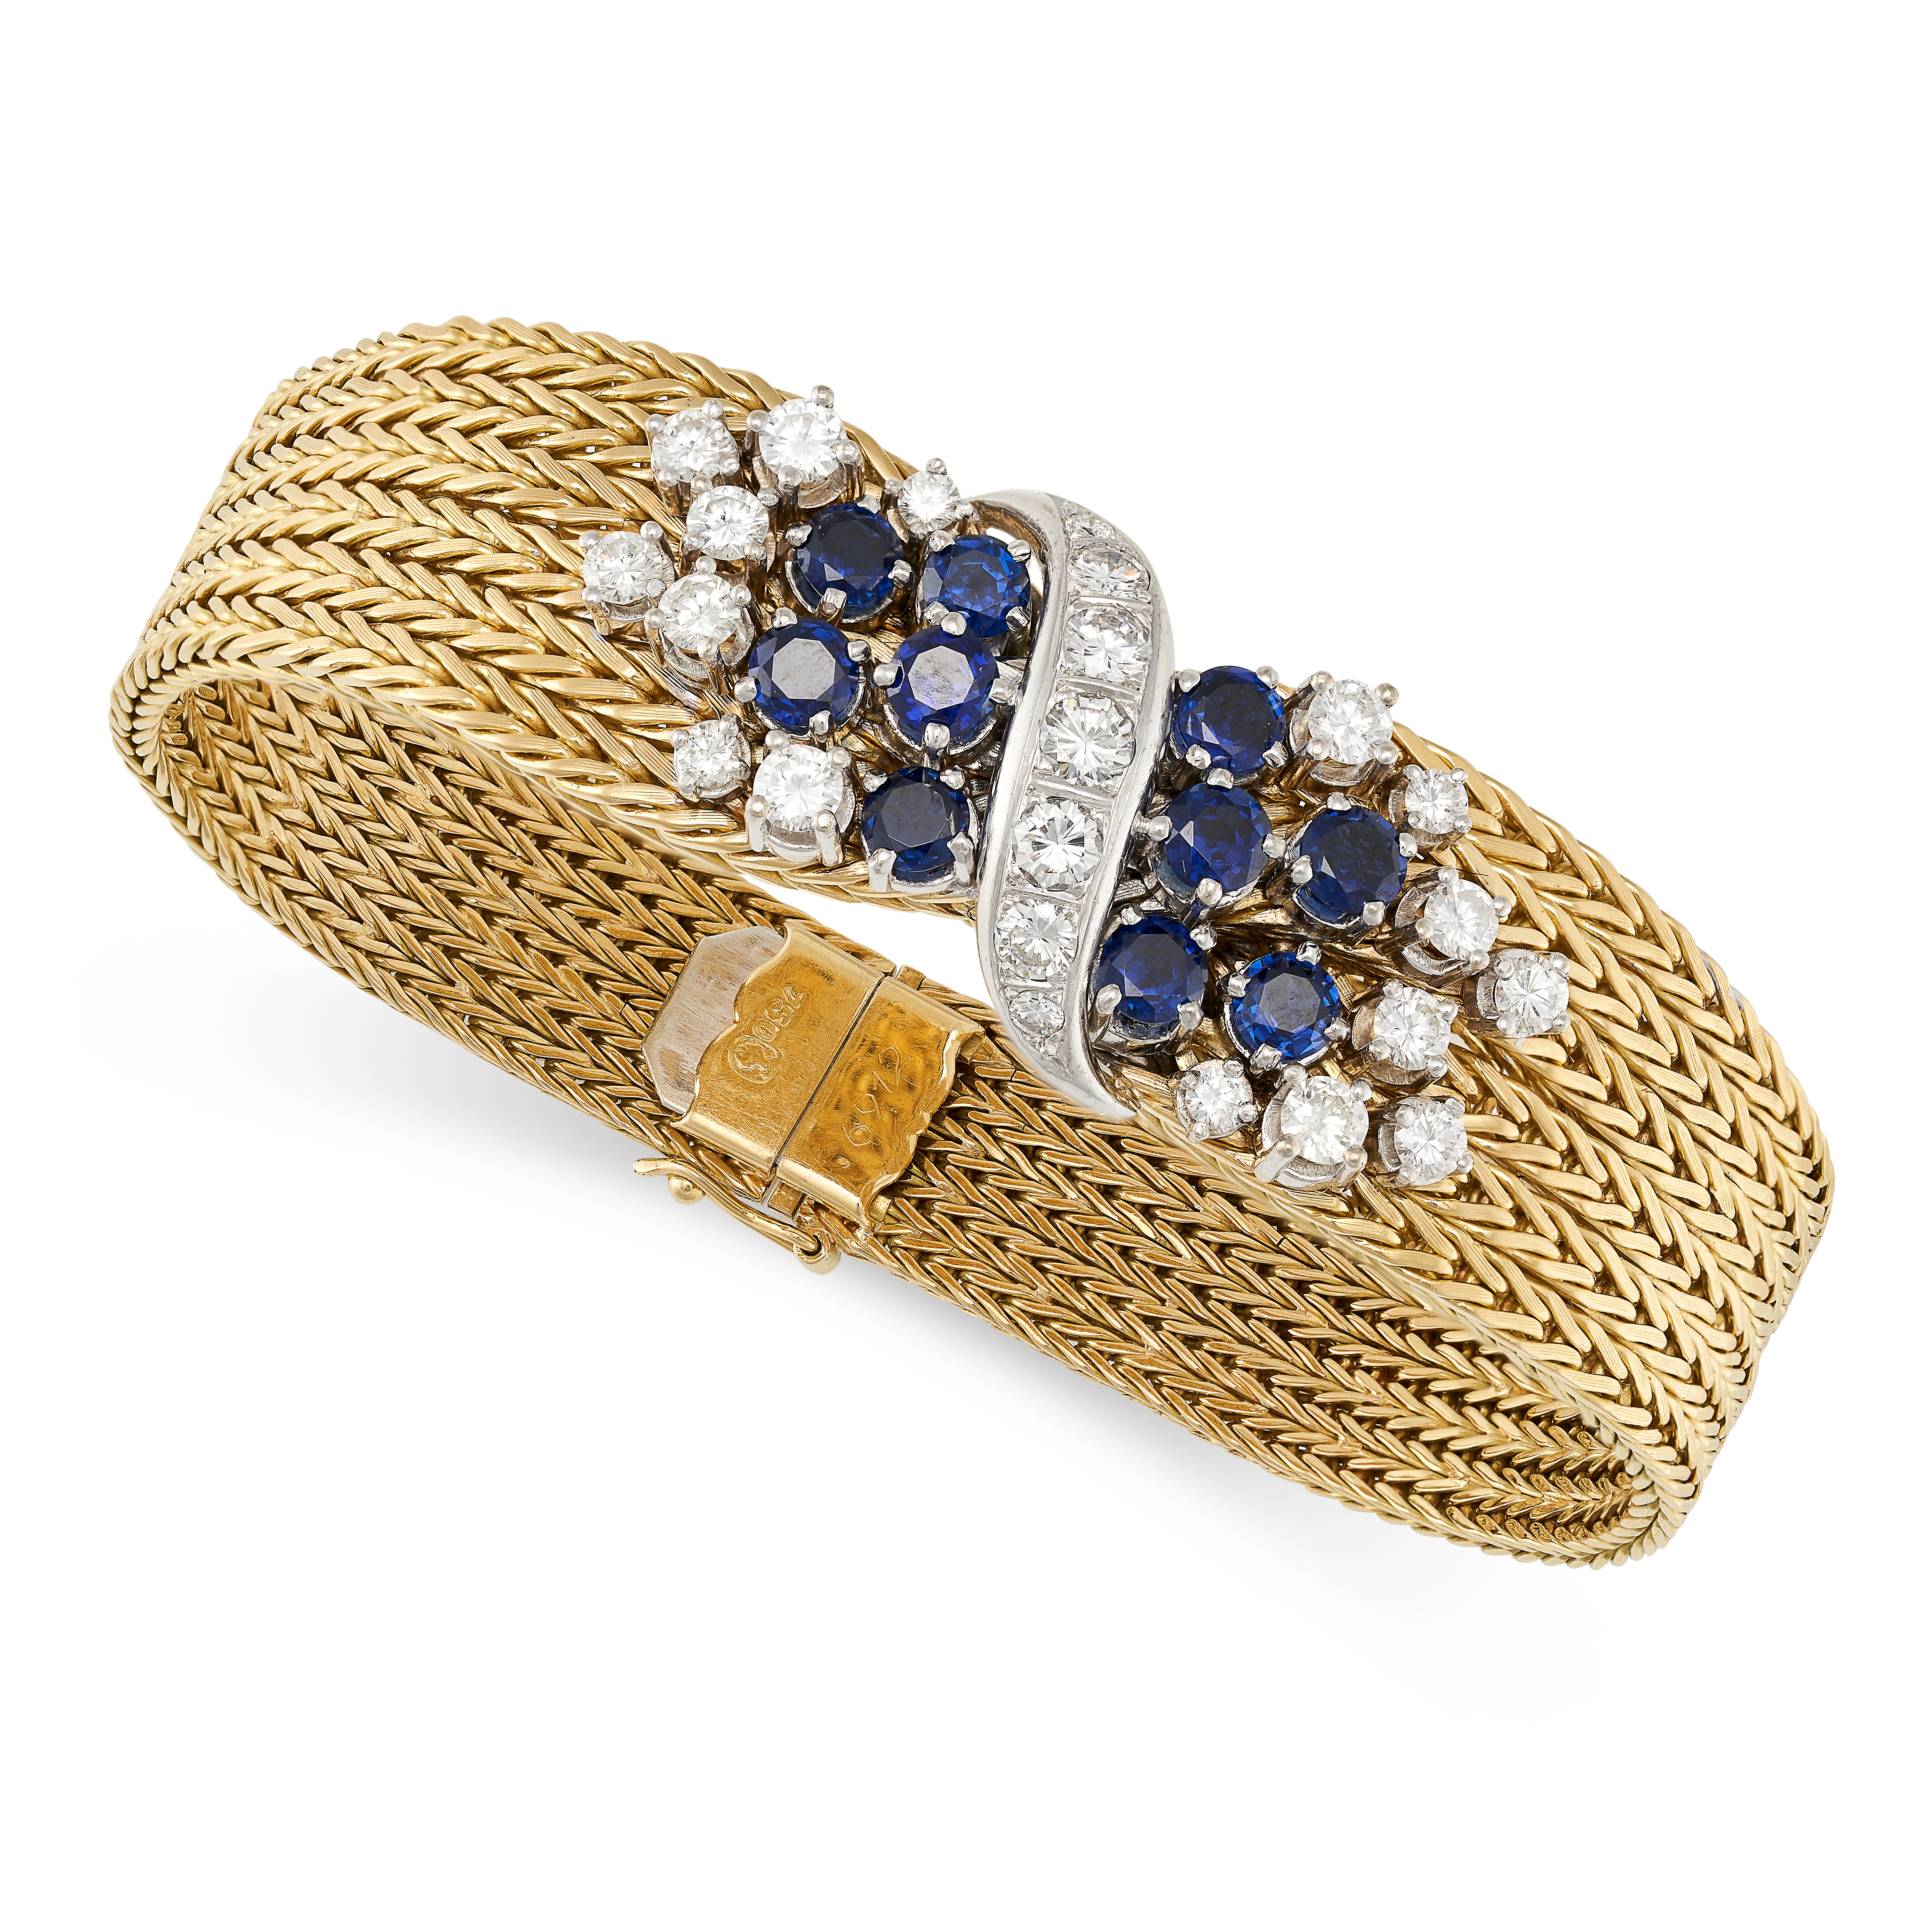 A VINTAGE SAPPHIRE AND DIAMOND BRACELET in 18ct yellow gold, the bracelet formed of woven links, ...